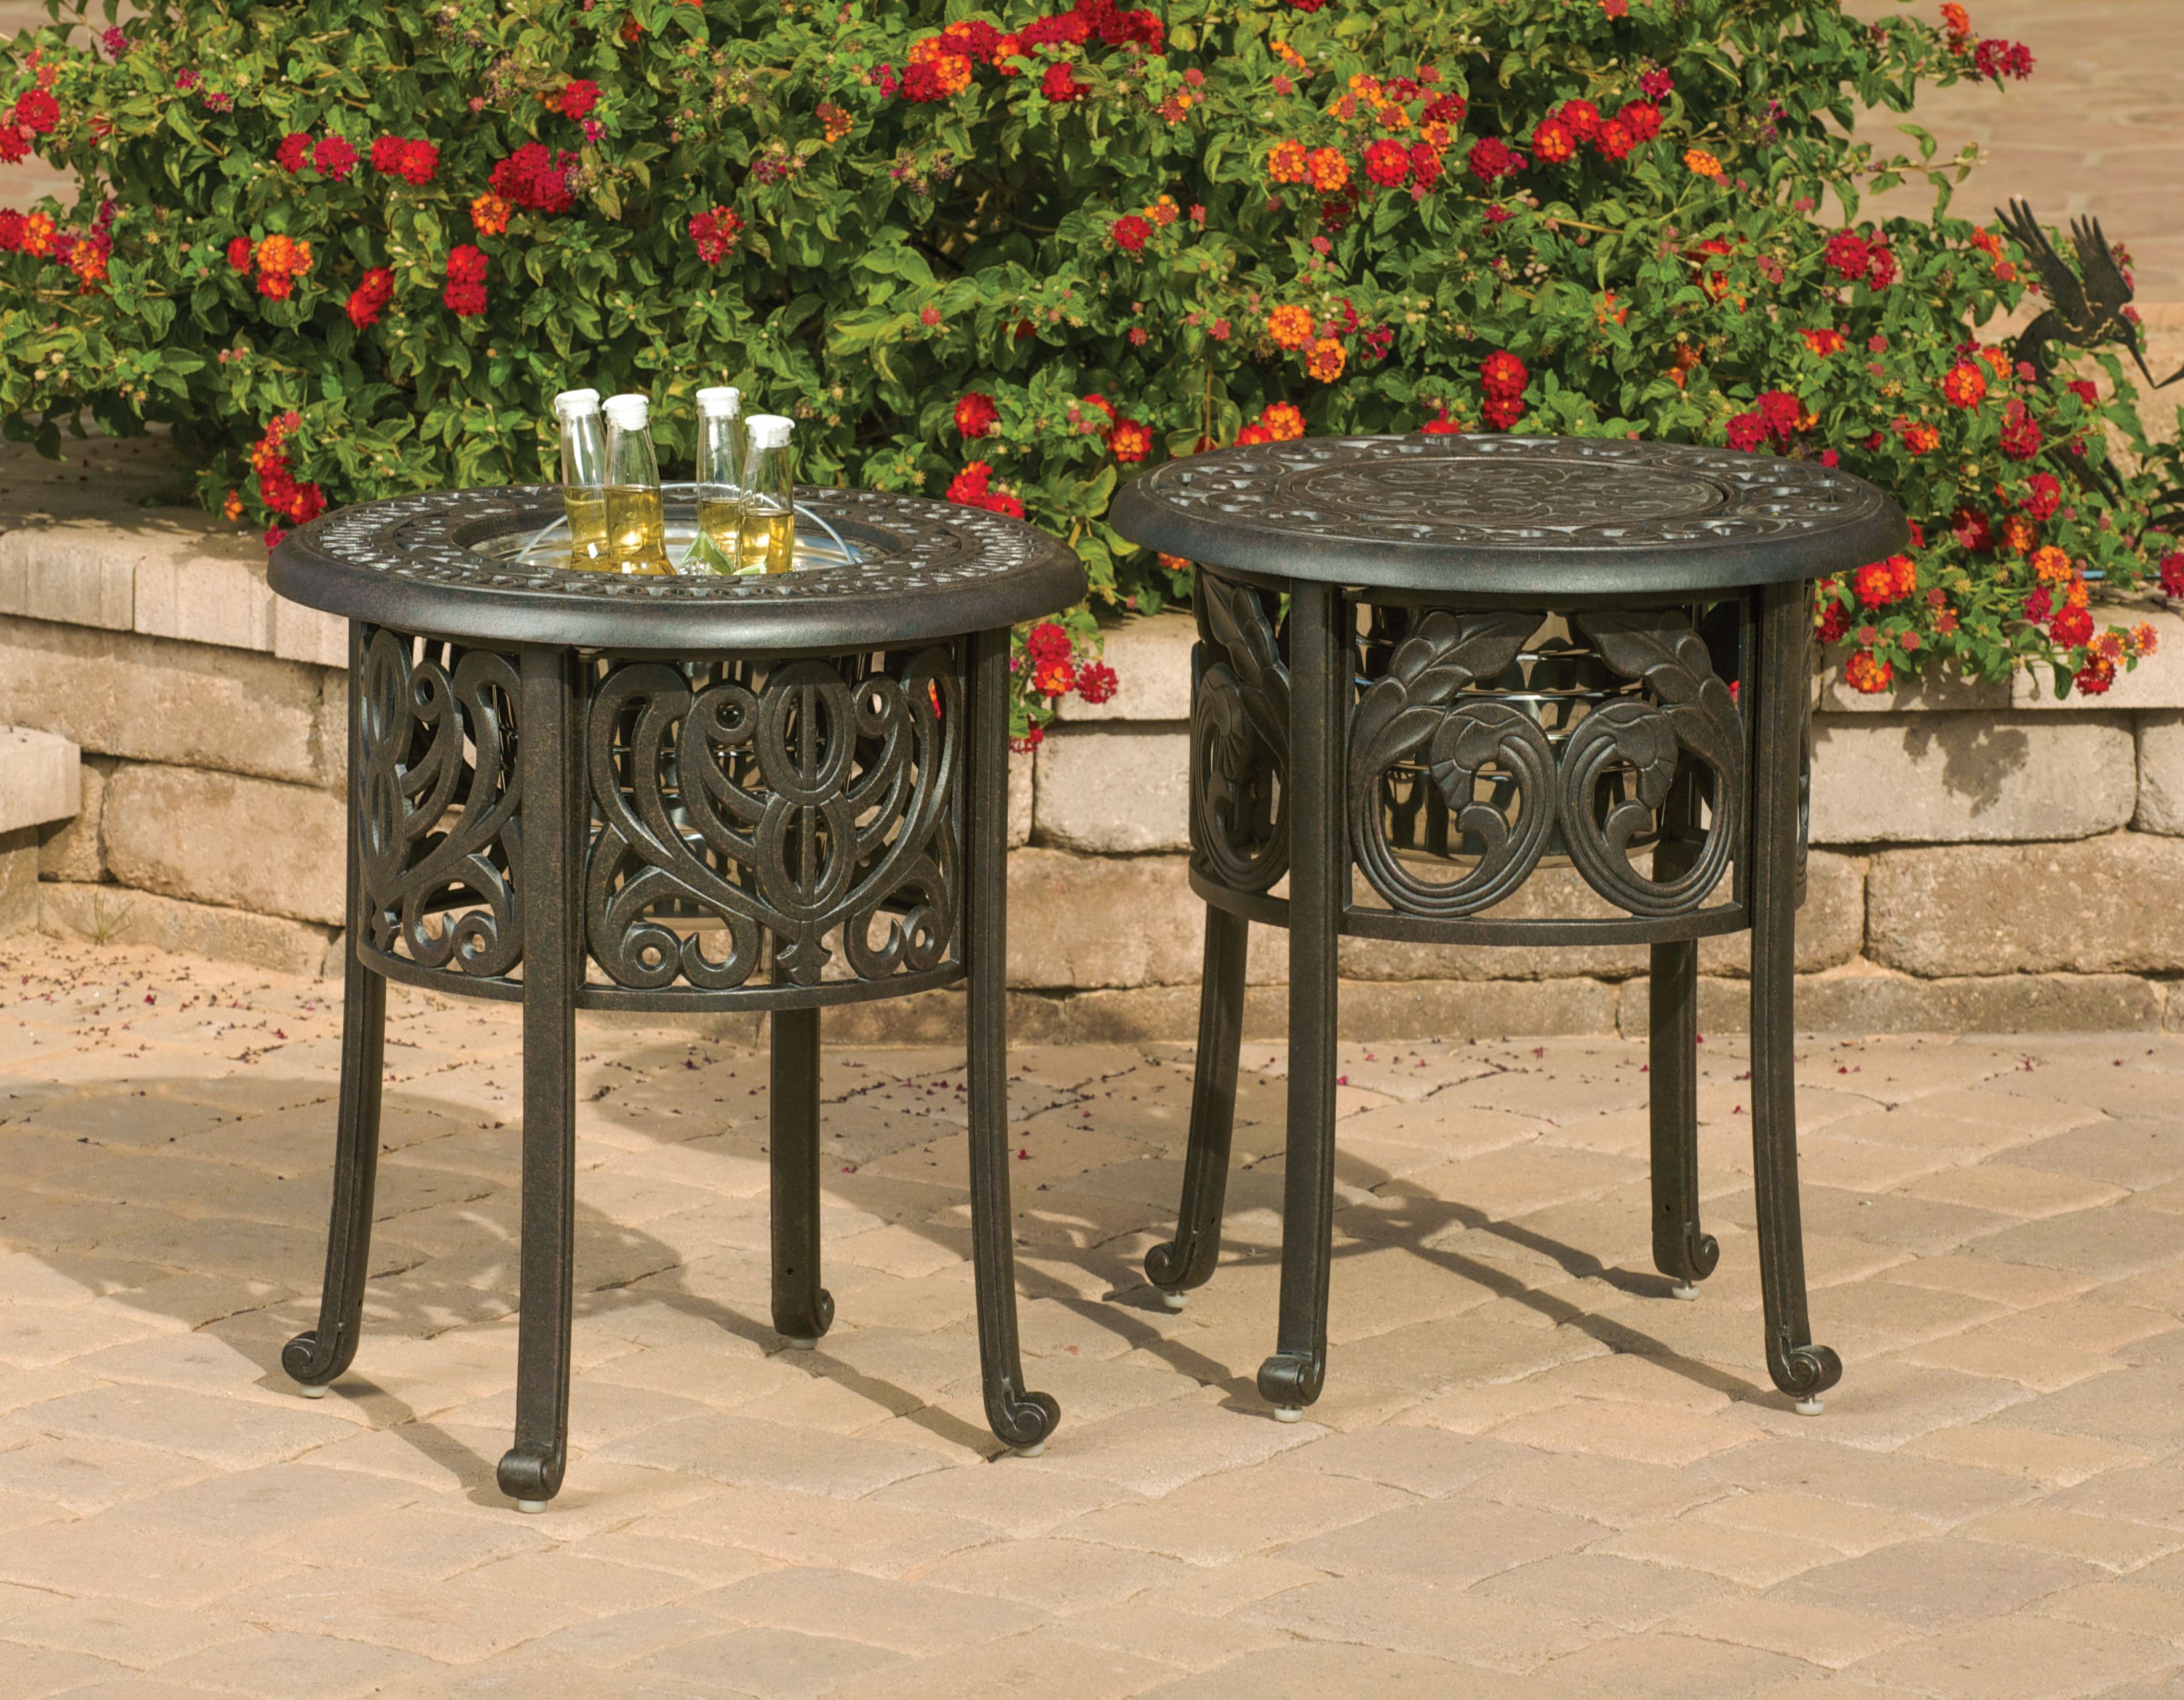 these hanamint round ice bucket tables are fancy enough for outdoor side table with gourmet meal and casual simple gathering simply fill the buckets wood top coffee lamp acrylic